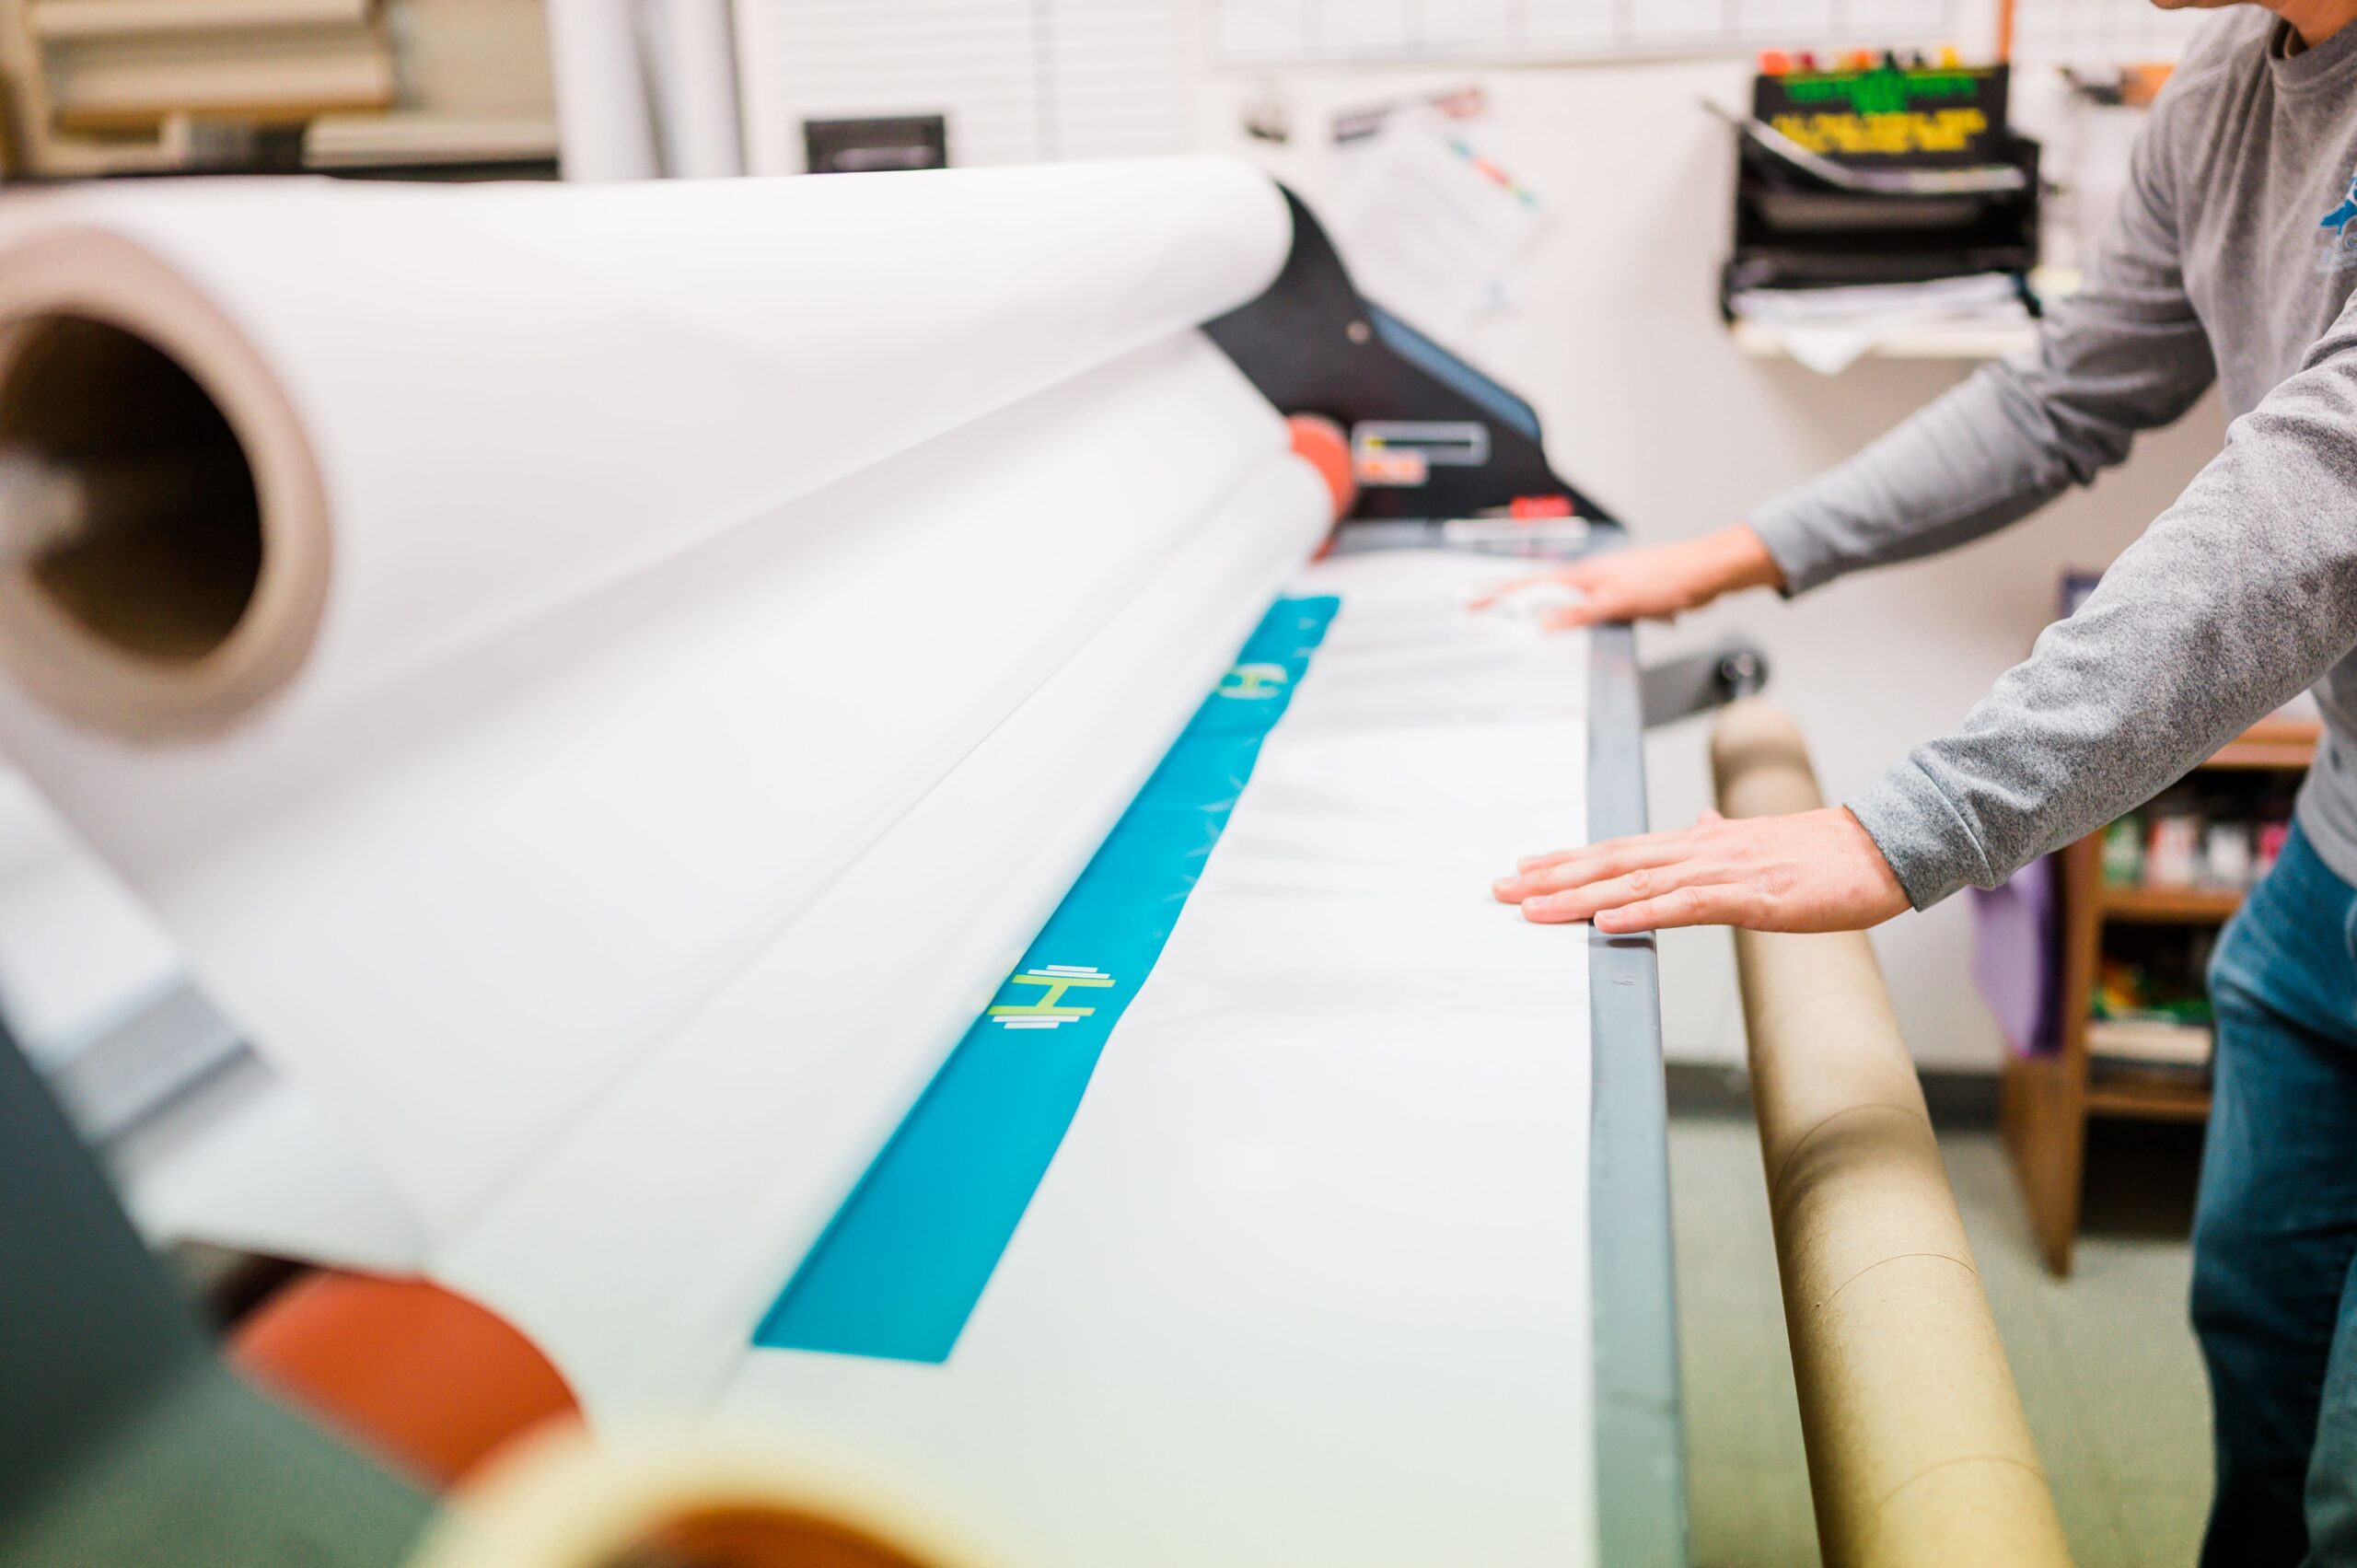 A pair of hands stretches white paper over long drafting table,